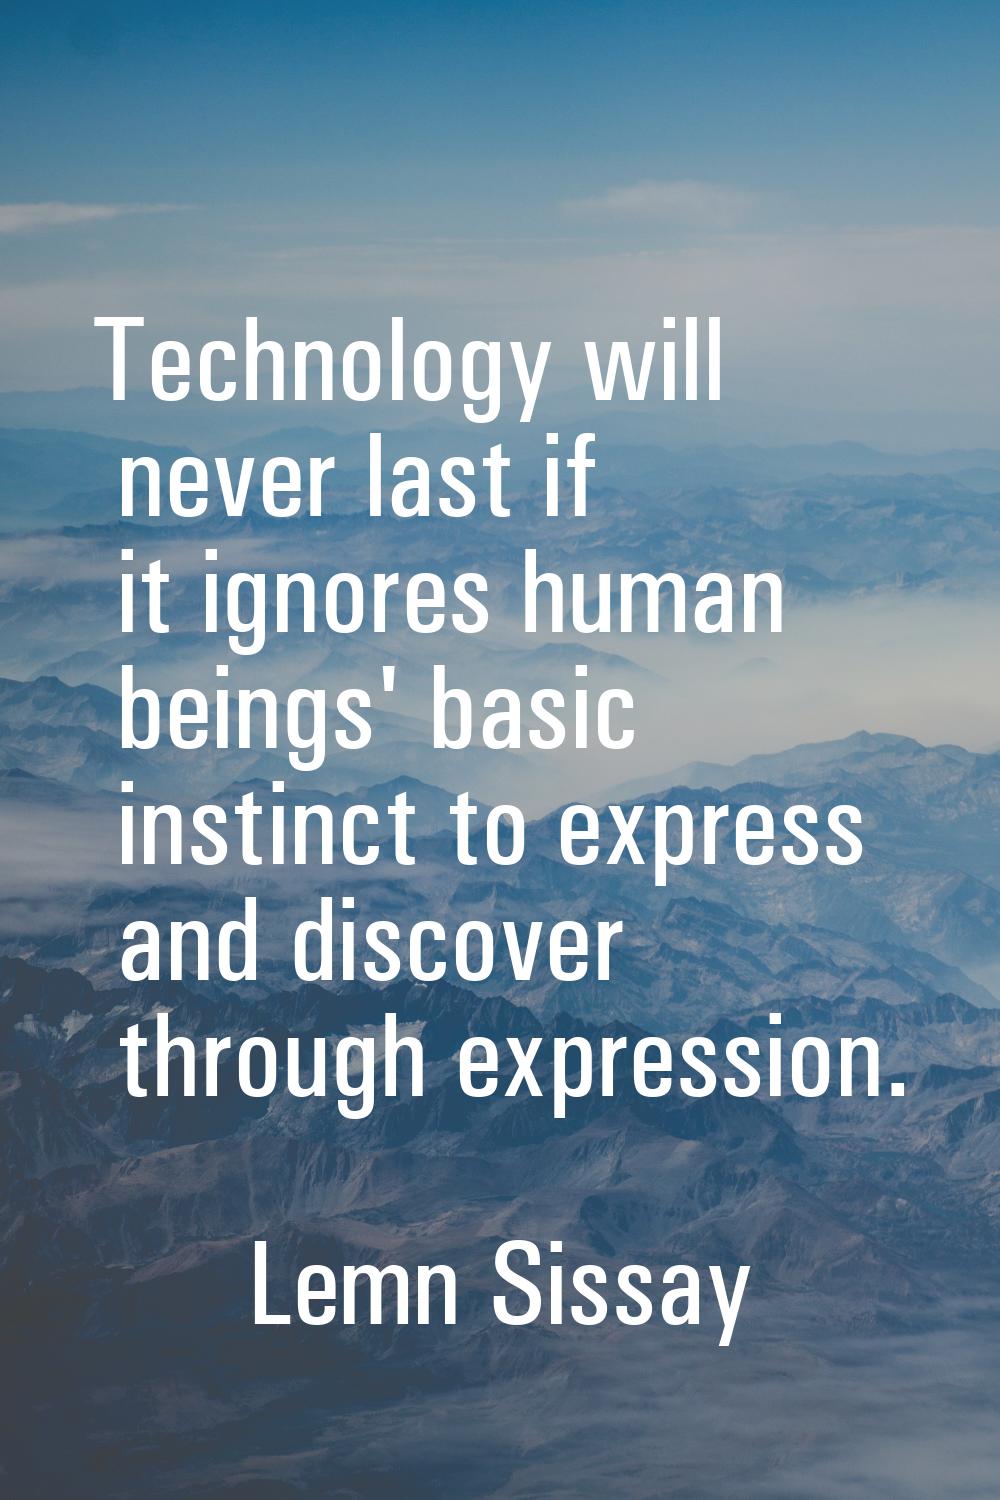 Technology will never last if it ignores human beings' basic instinct to express and discover throu